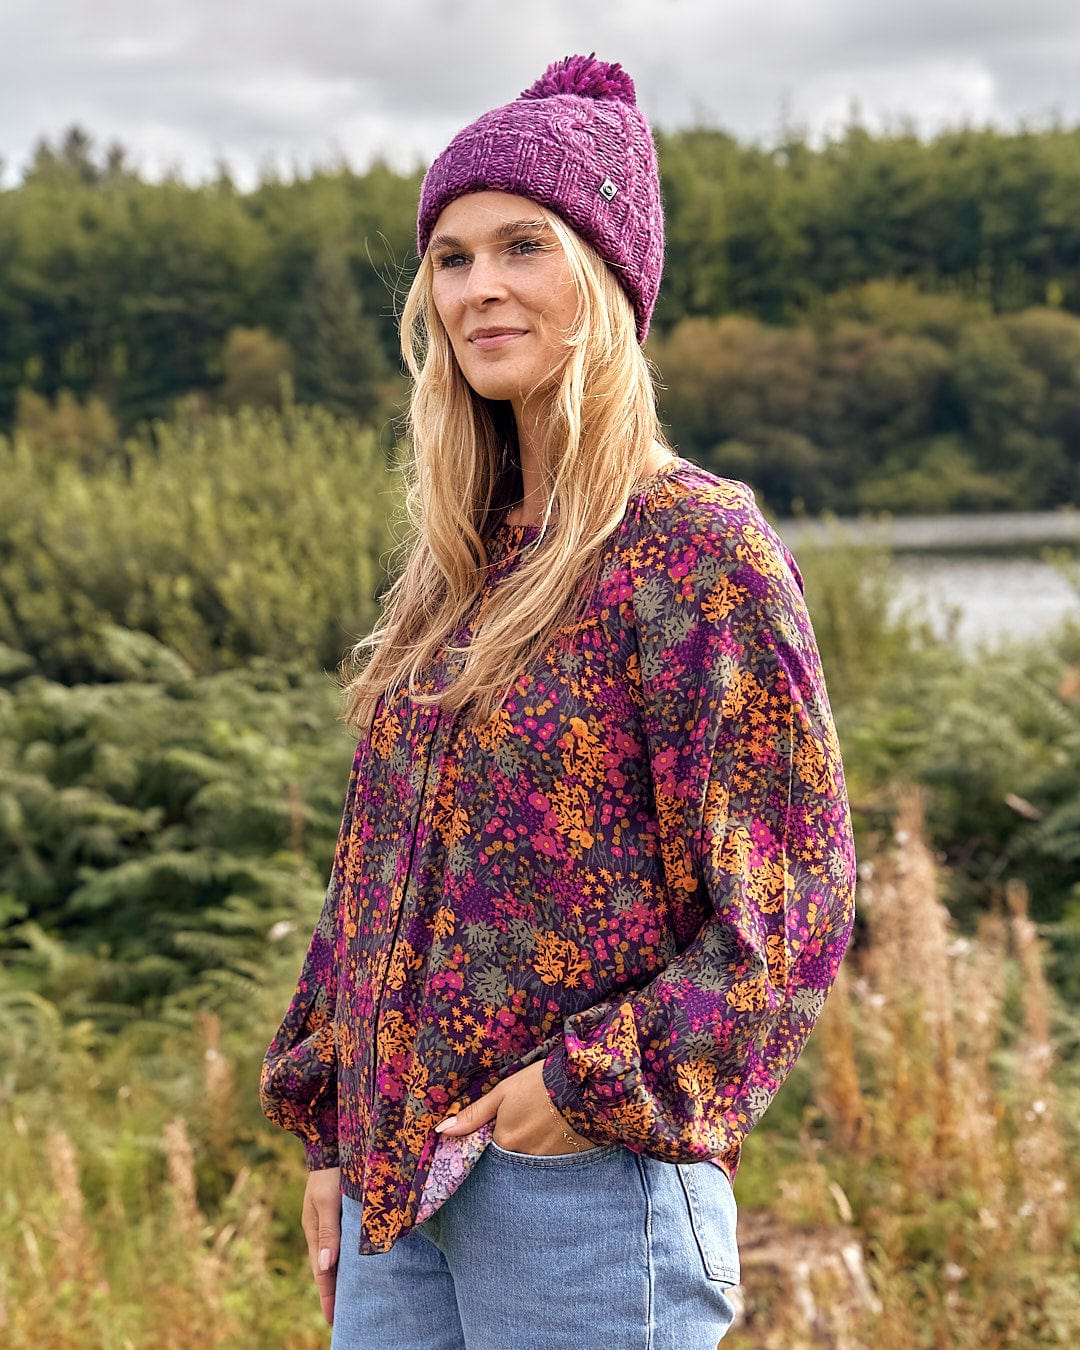 A woman wearing a Saltrock Twist - Cabled Beanie - Dark Pink and jeans standing by a lake.